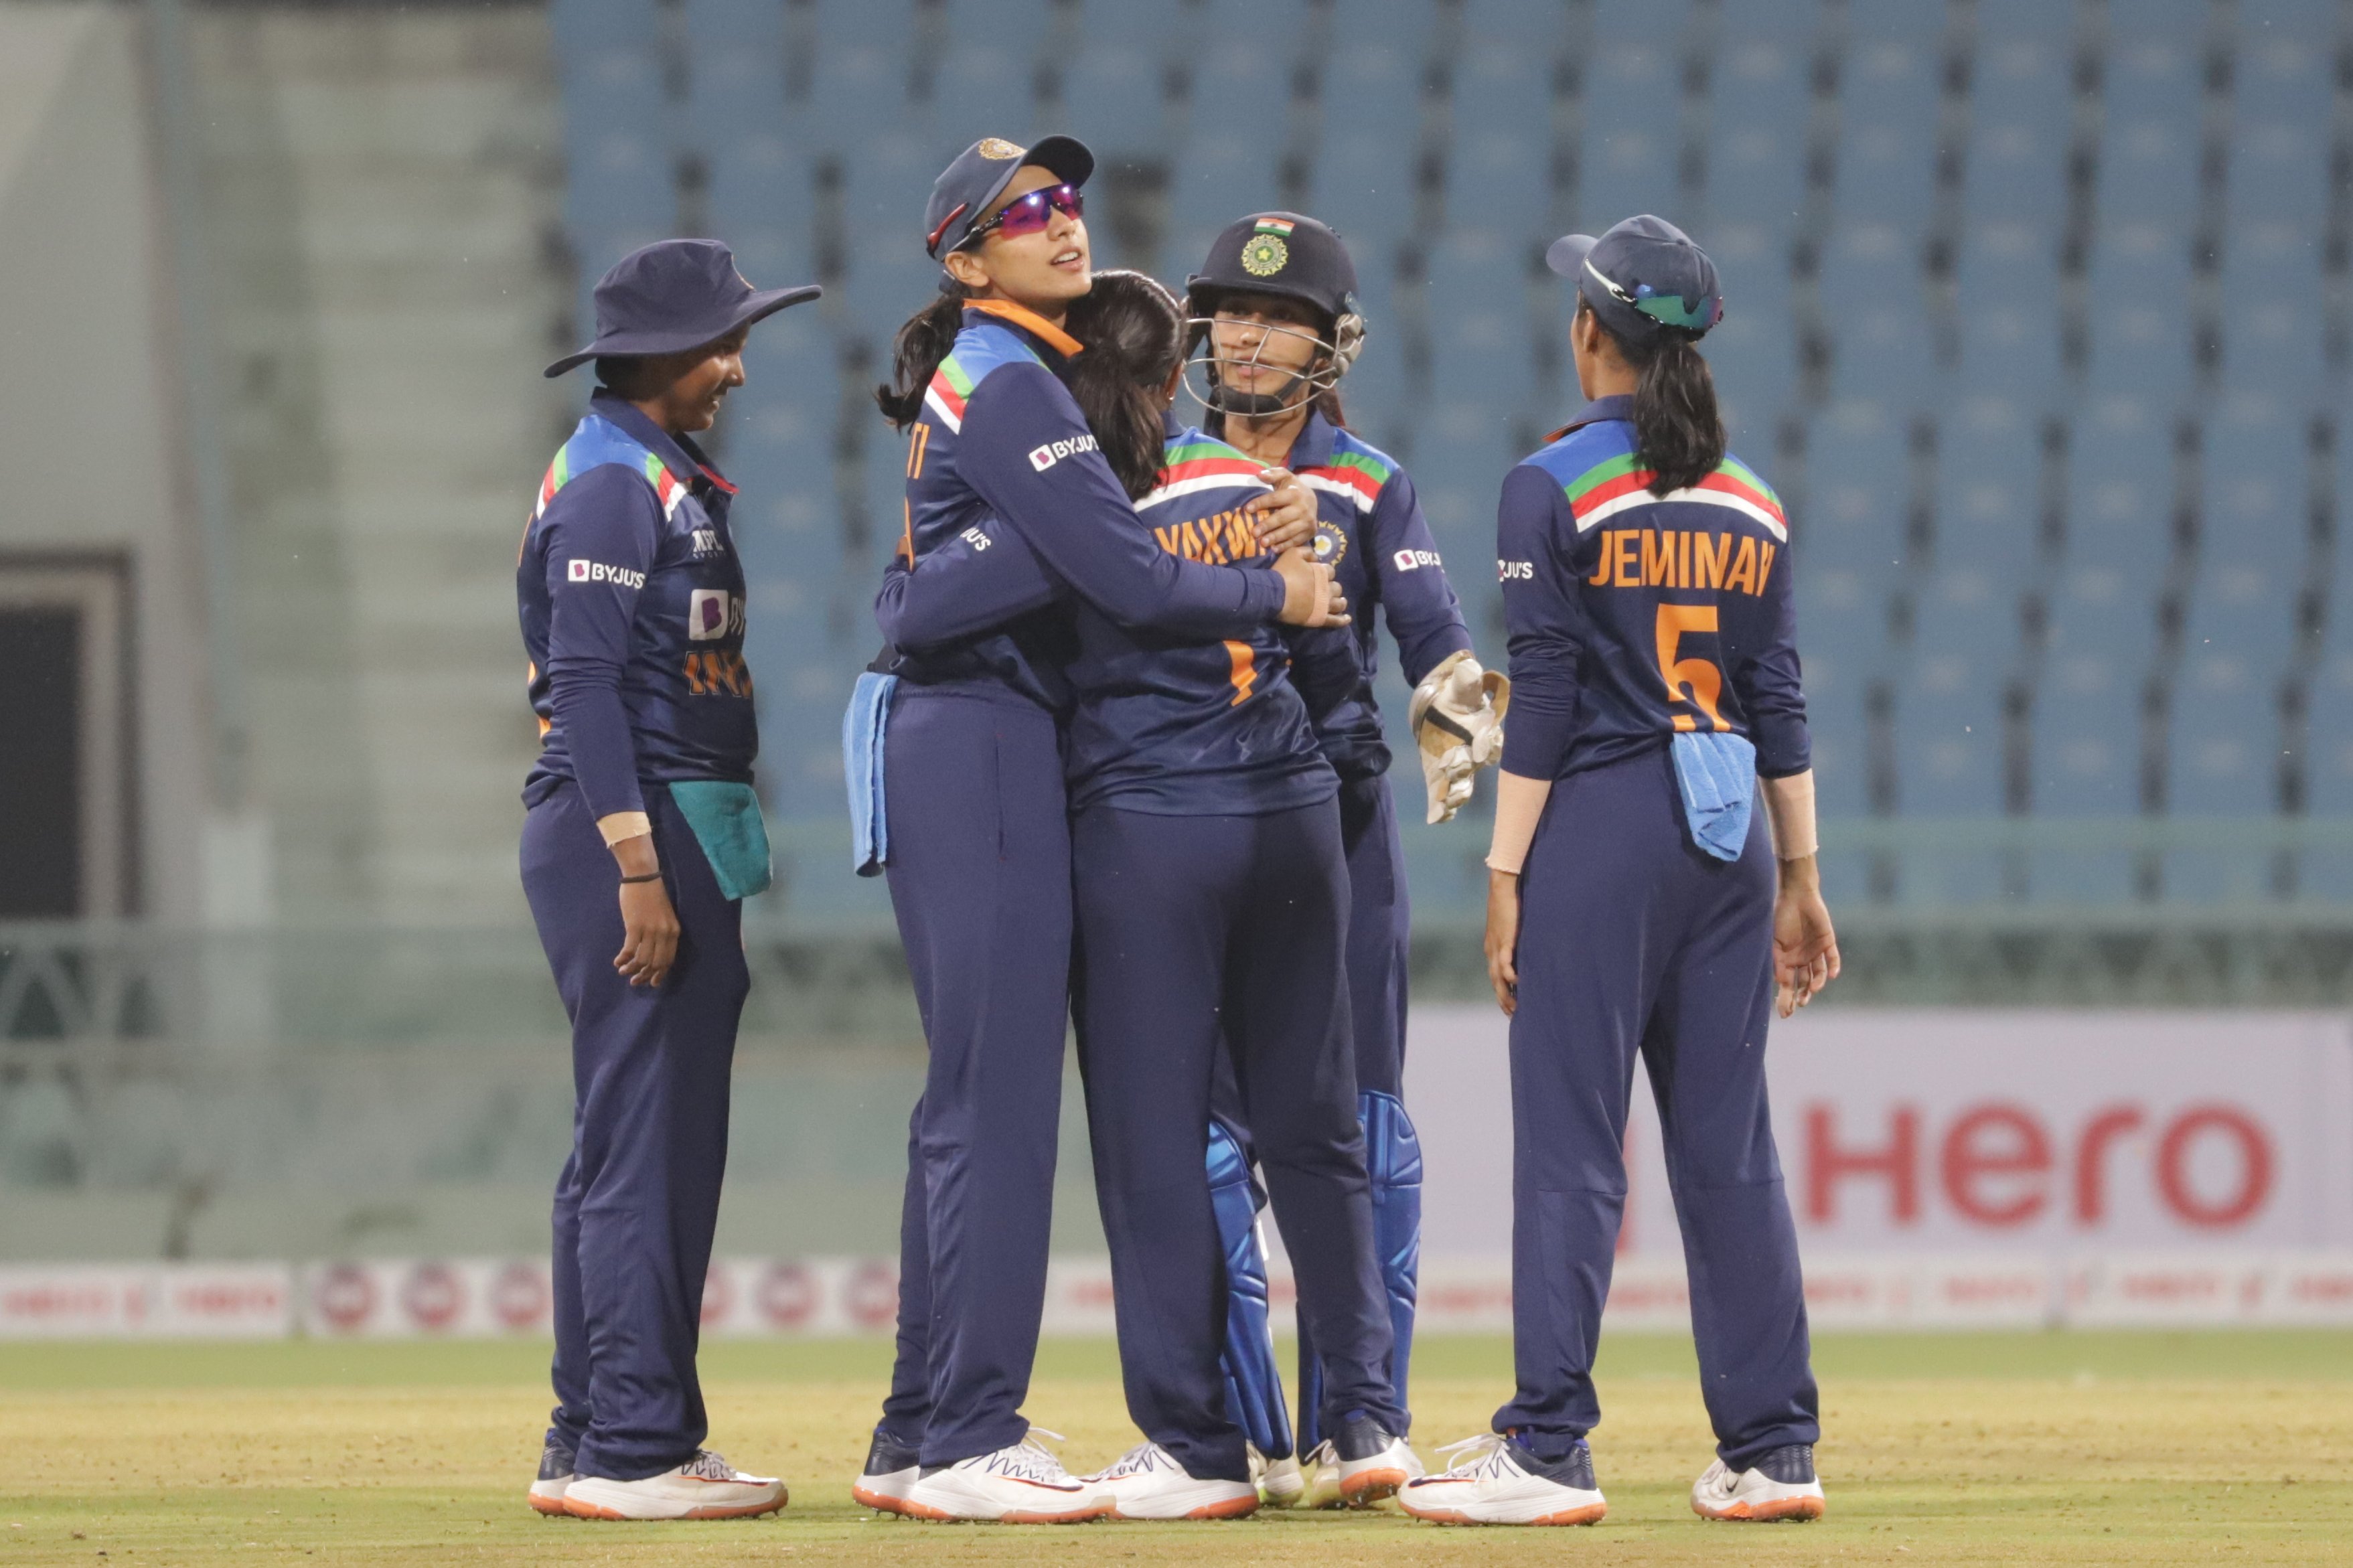 IND W vs SA W | We cannot keep giving excuses, need to pull our socks up, claims Smriti Mandhana